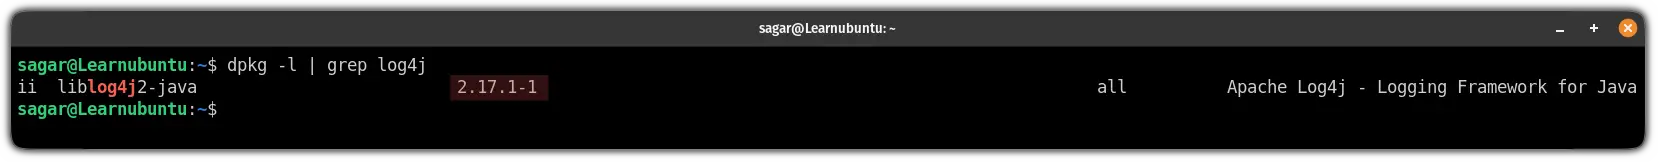 find the installed version of Log4j in ubuntu using the dpkg command